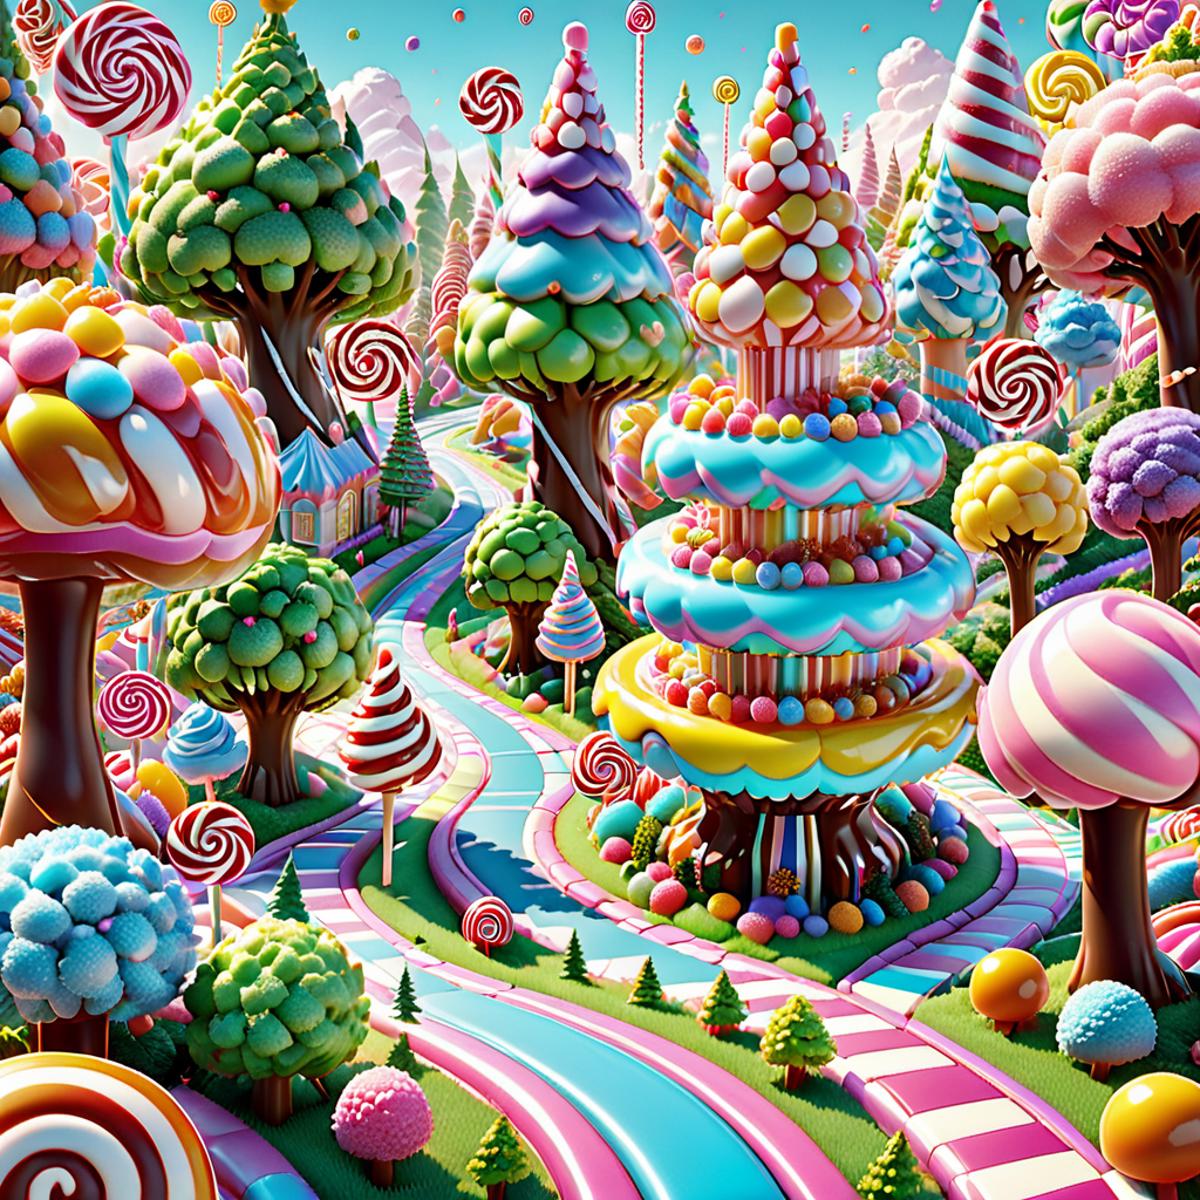 A whimsical scene of a candy land with a road made of lollipops and candy canes.